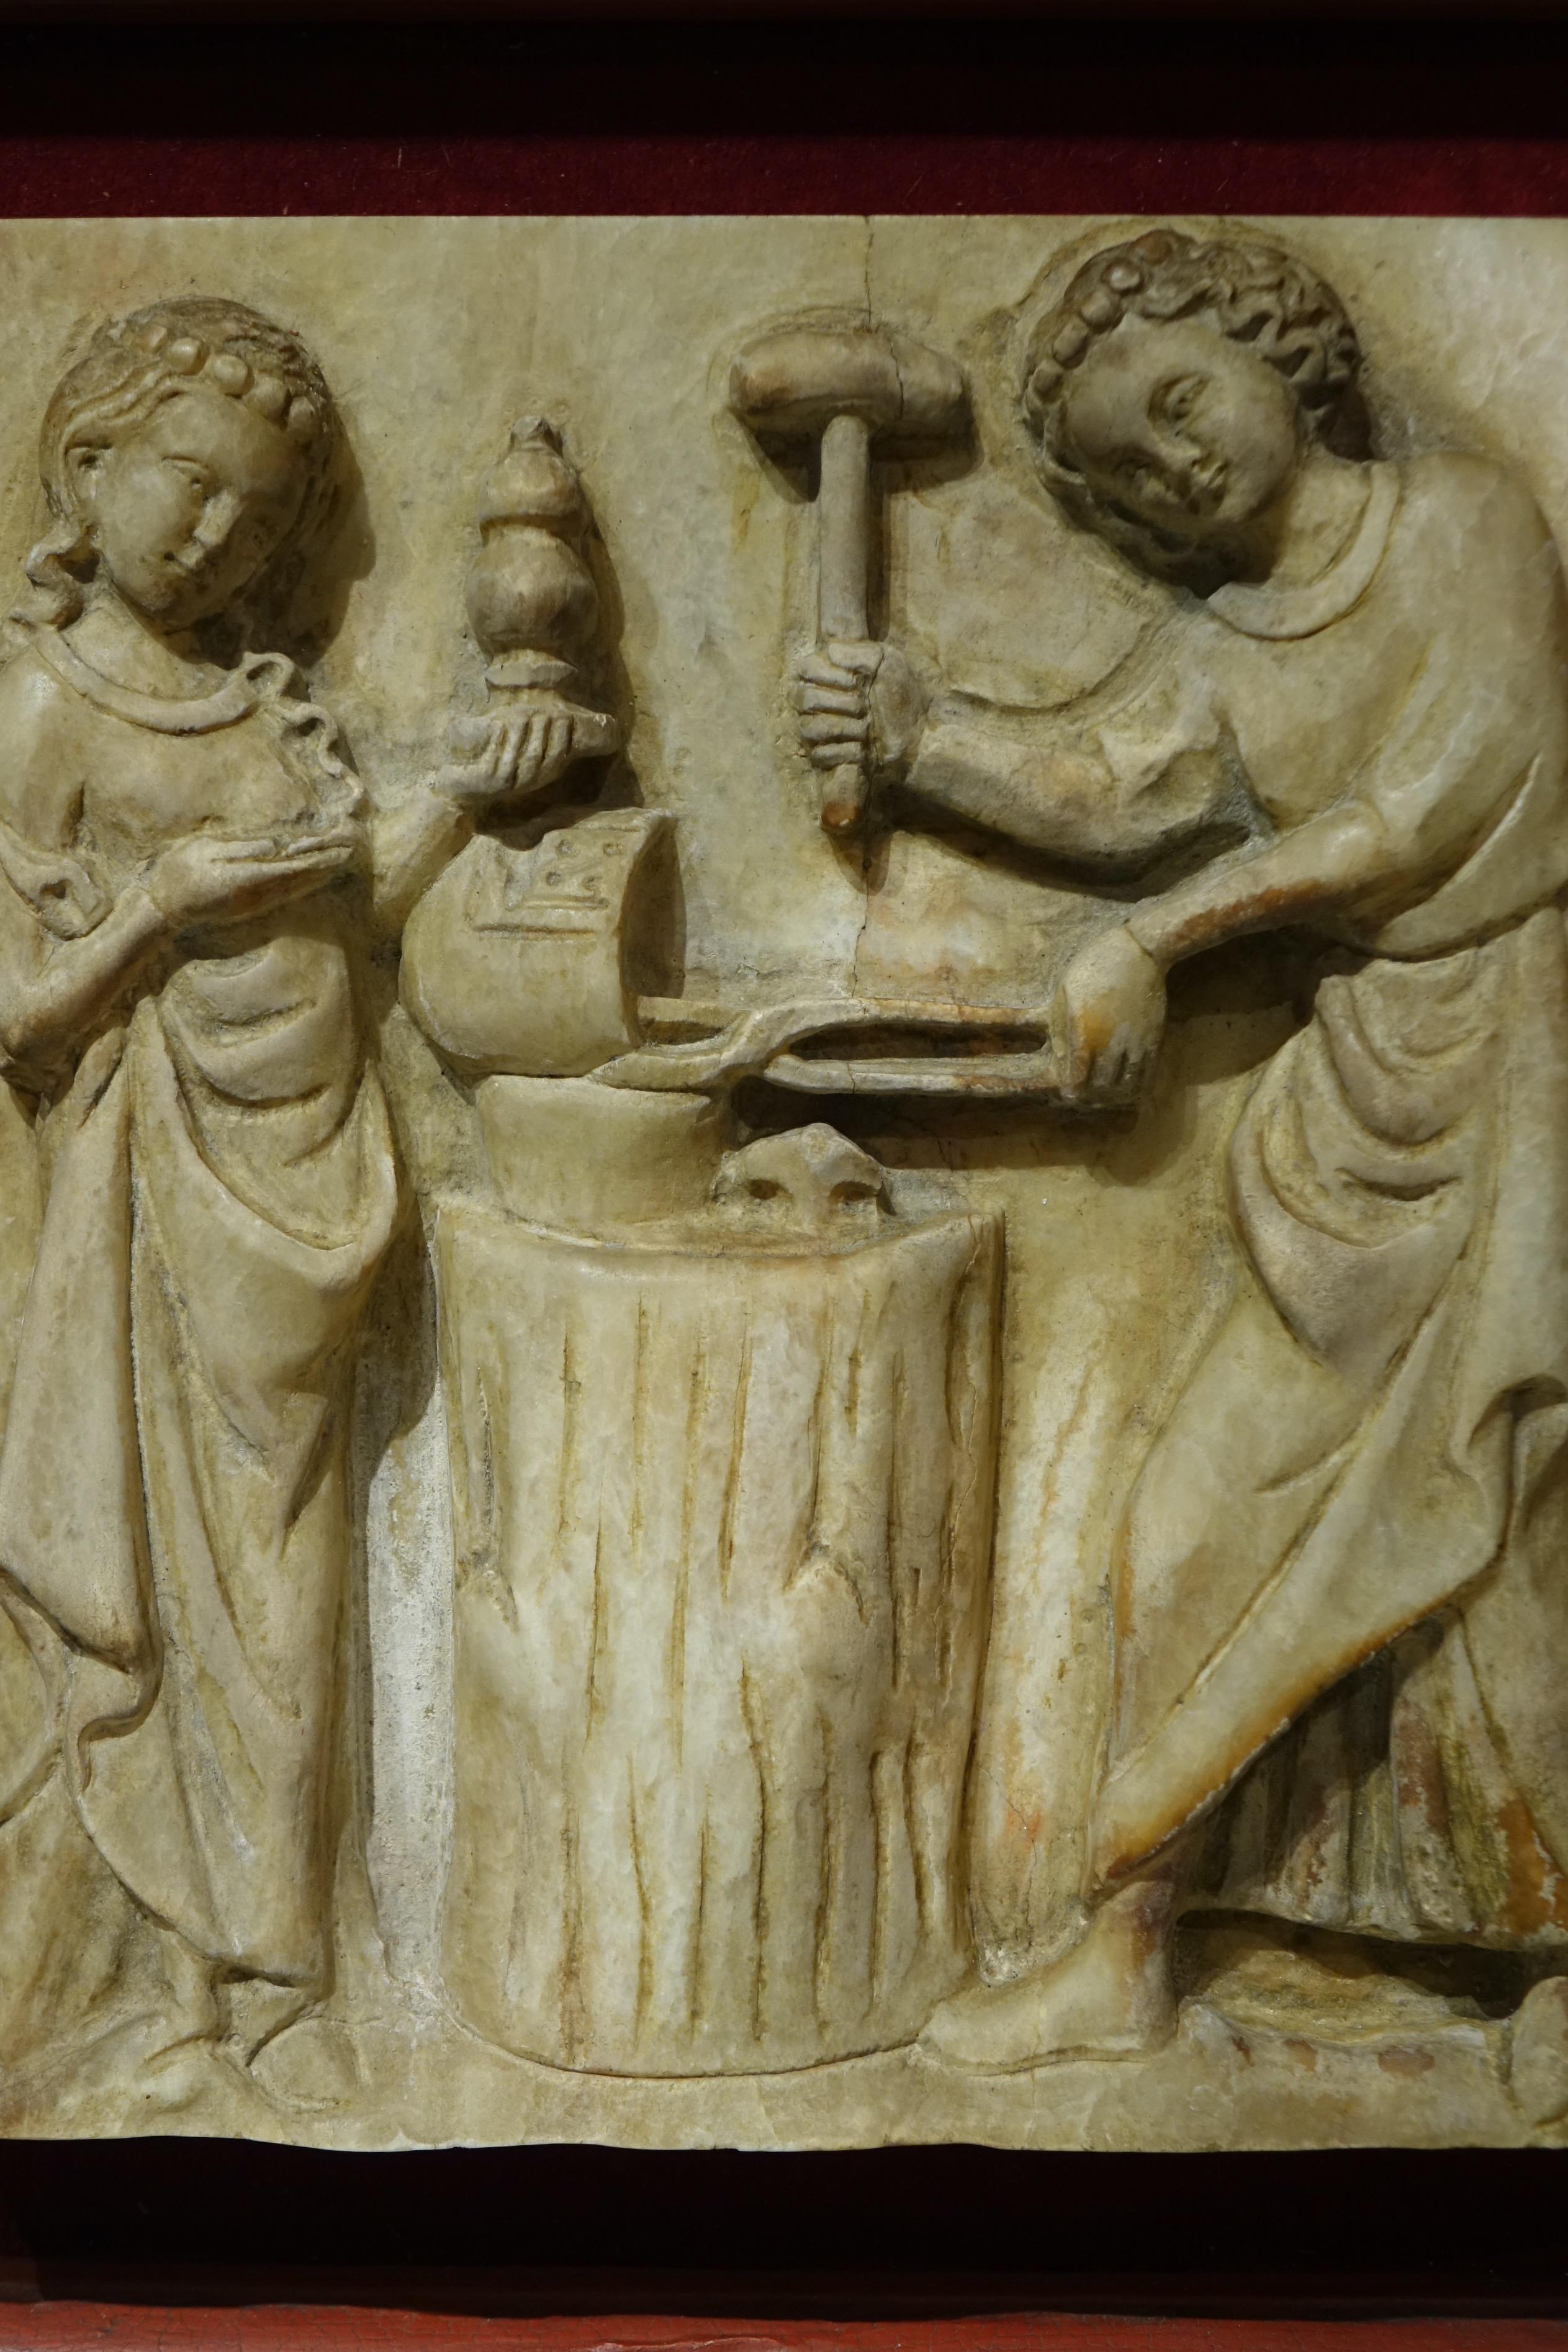 Alabaster plate in high relief illustrating a forgeron working on a metal object (a helmet?). A young woman is in front of him holding in her left hand an ovoid vase or reliquary that she is holding in her right hand.
The scene represented is being